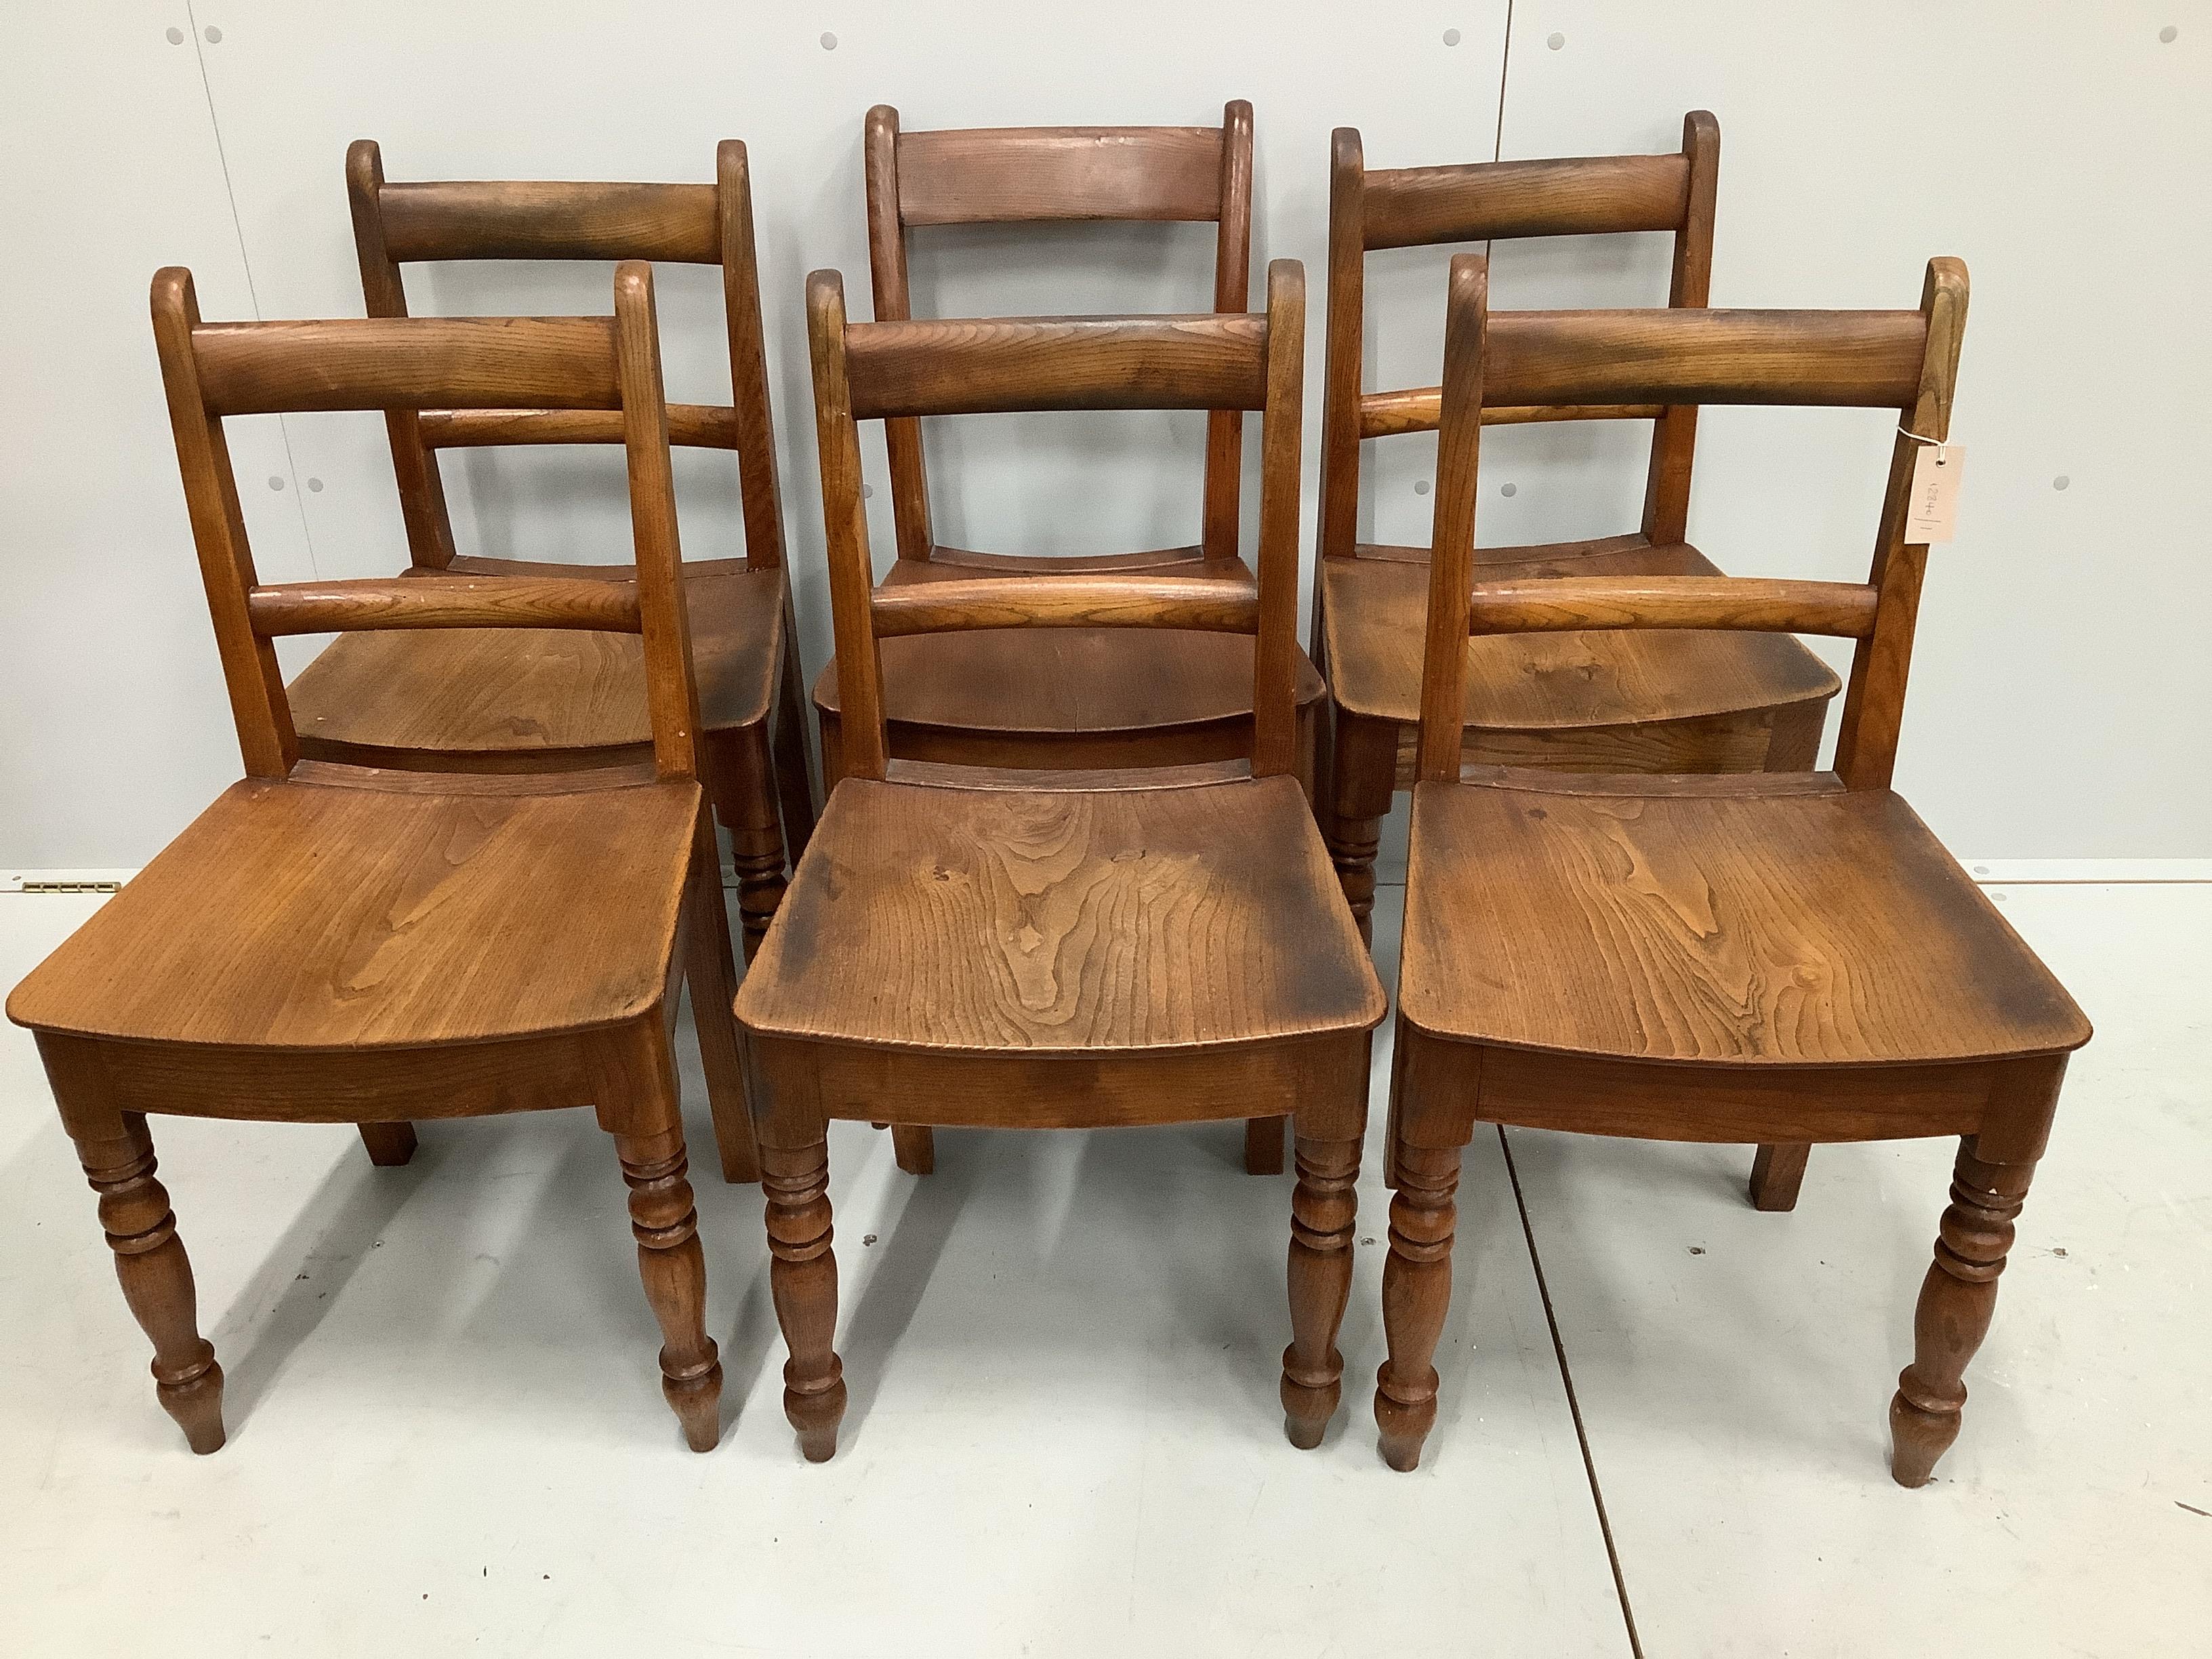 A harlequin set of six Regency Provincial elm and beech wood seat dining chairs                                                                                                                                             